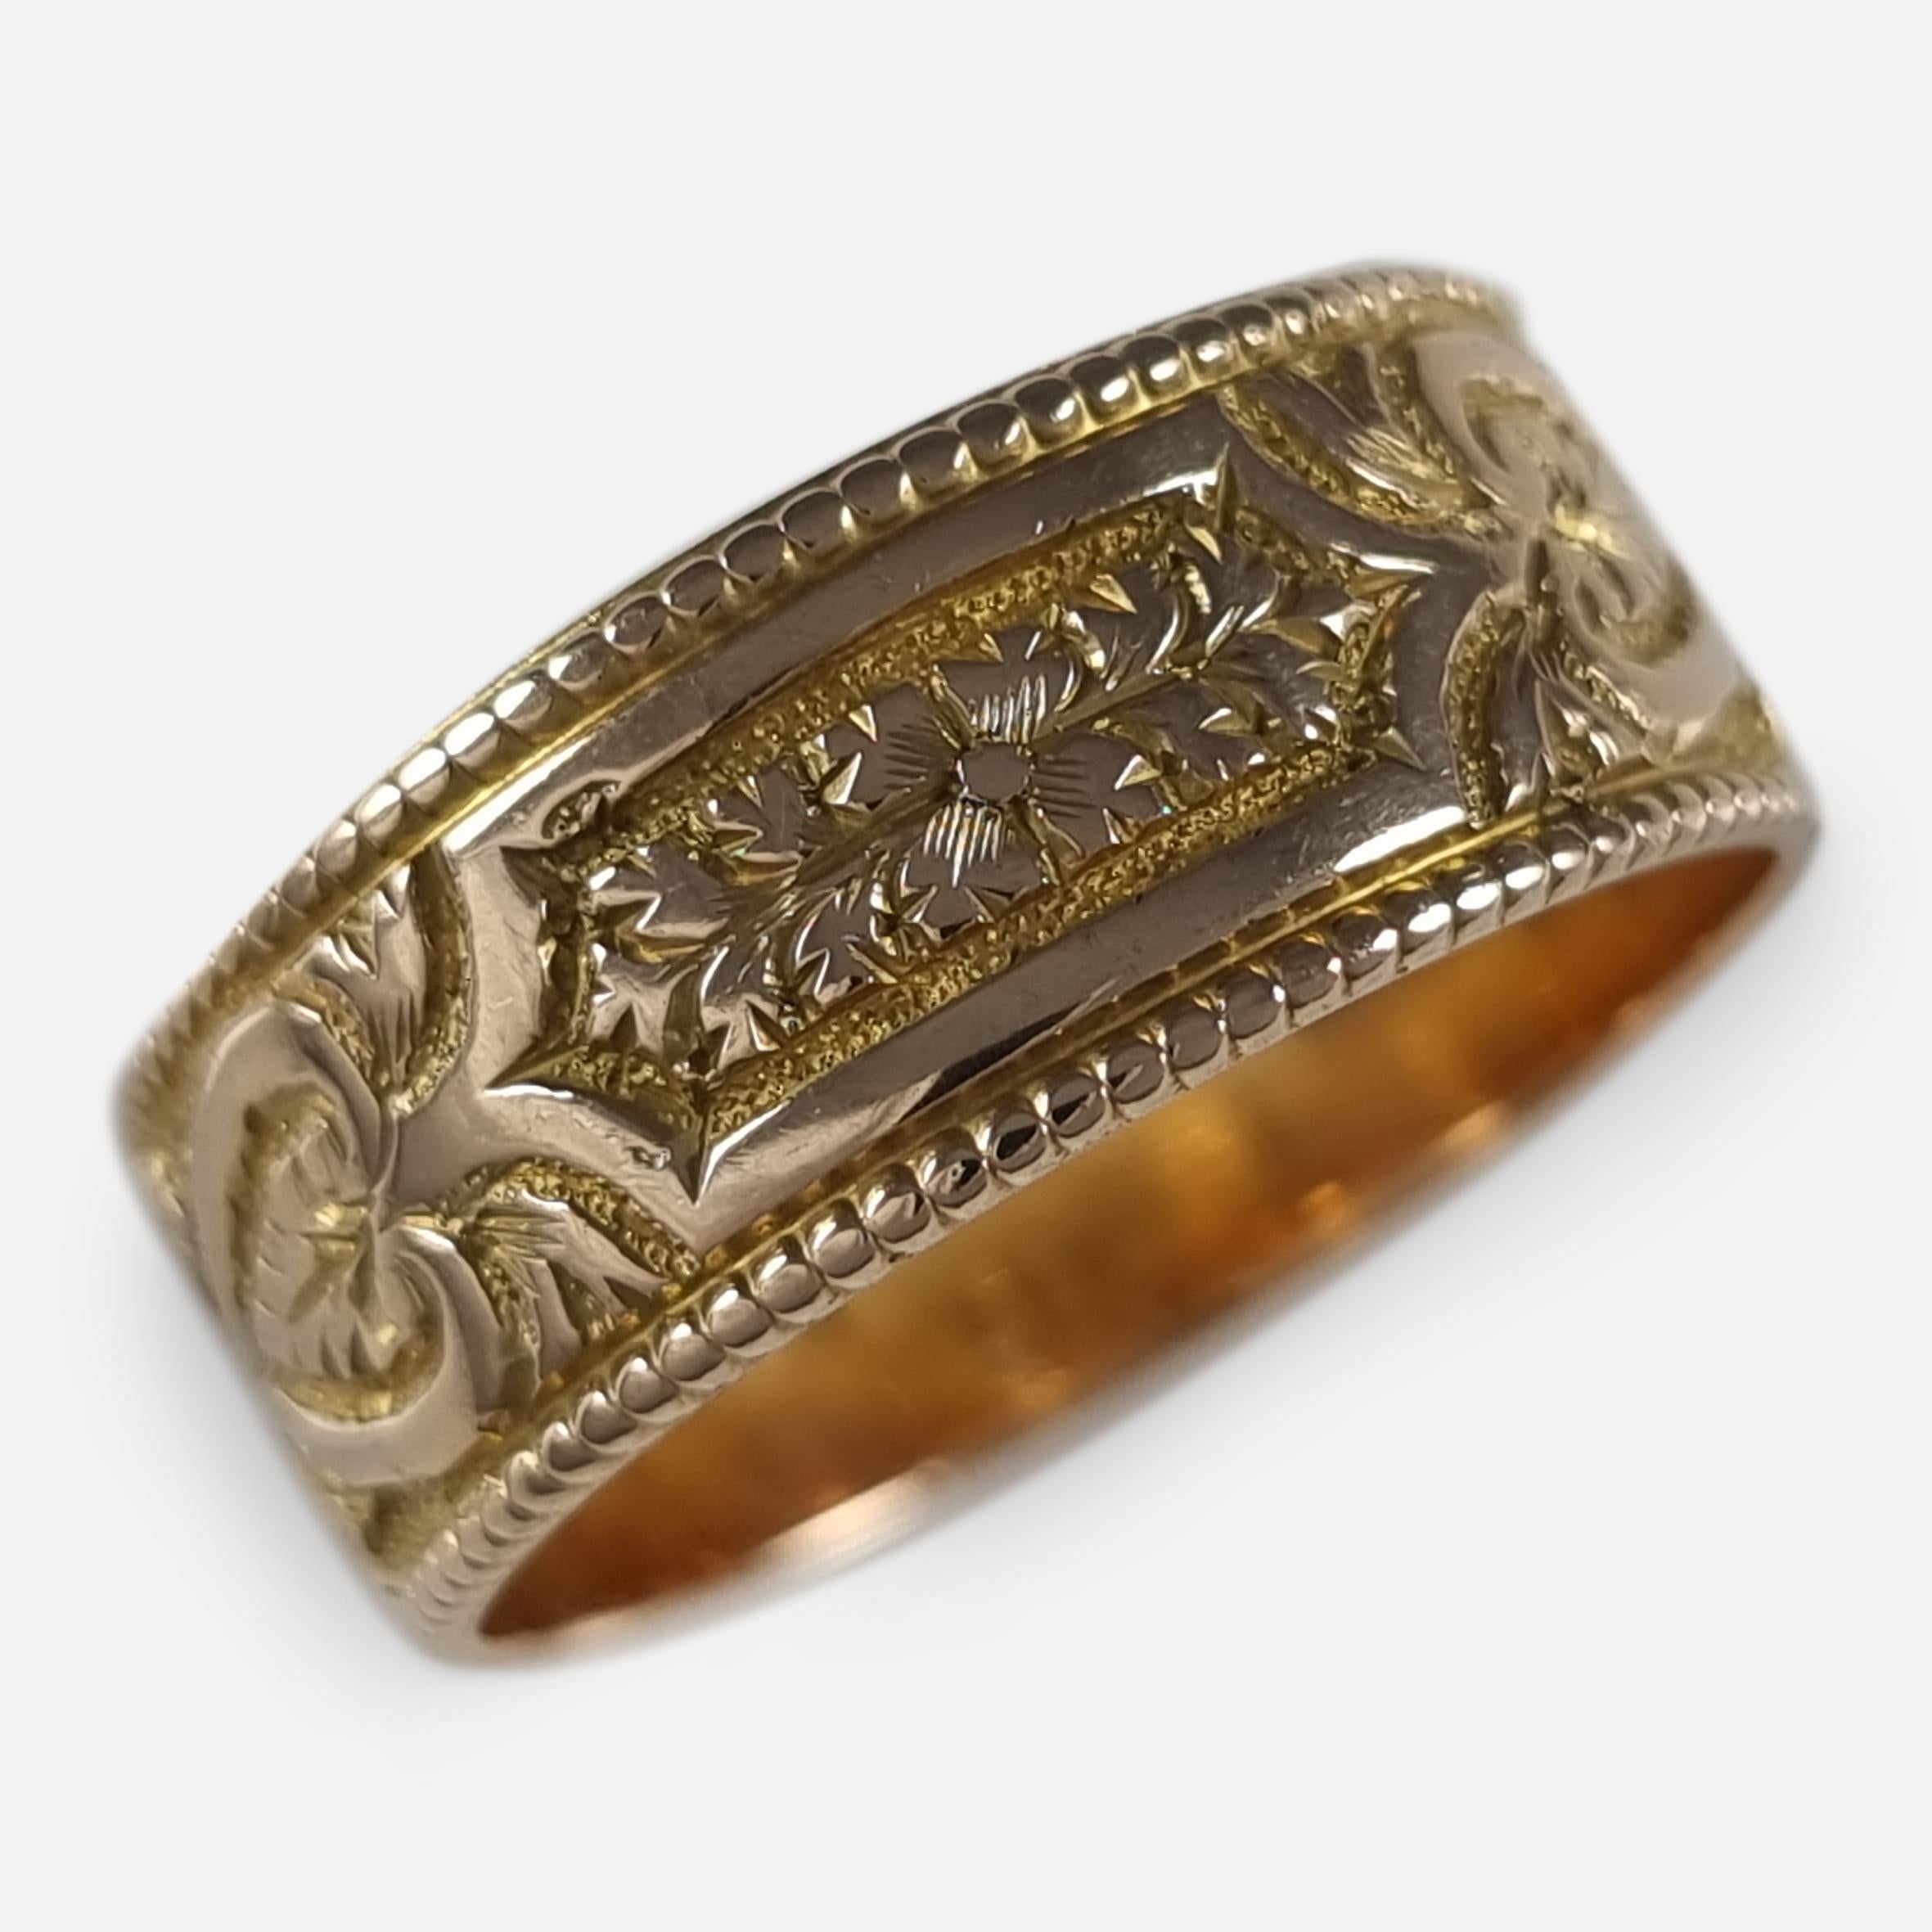 A Victorian 18ct yellow gold engraved Keeper ring. The ring is engraved with an embossed foliate decoration.

The ring is hallmarked with Birmingham marks, '18' for 18 carat gold, and date letter 'i' to denote 1883.

Assay: - .750 Gold